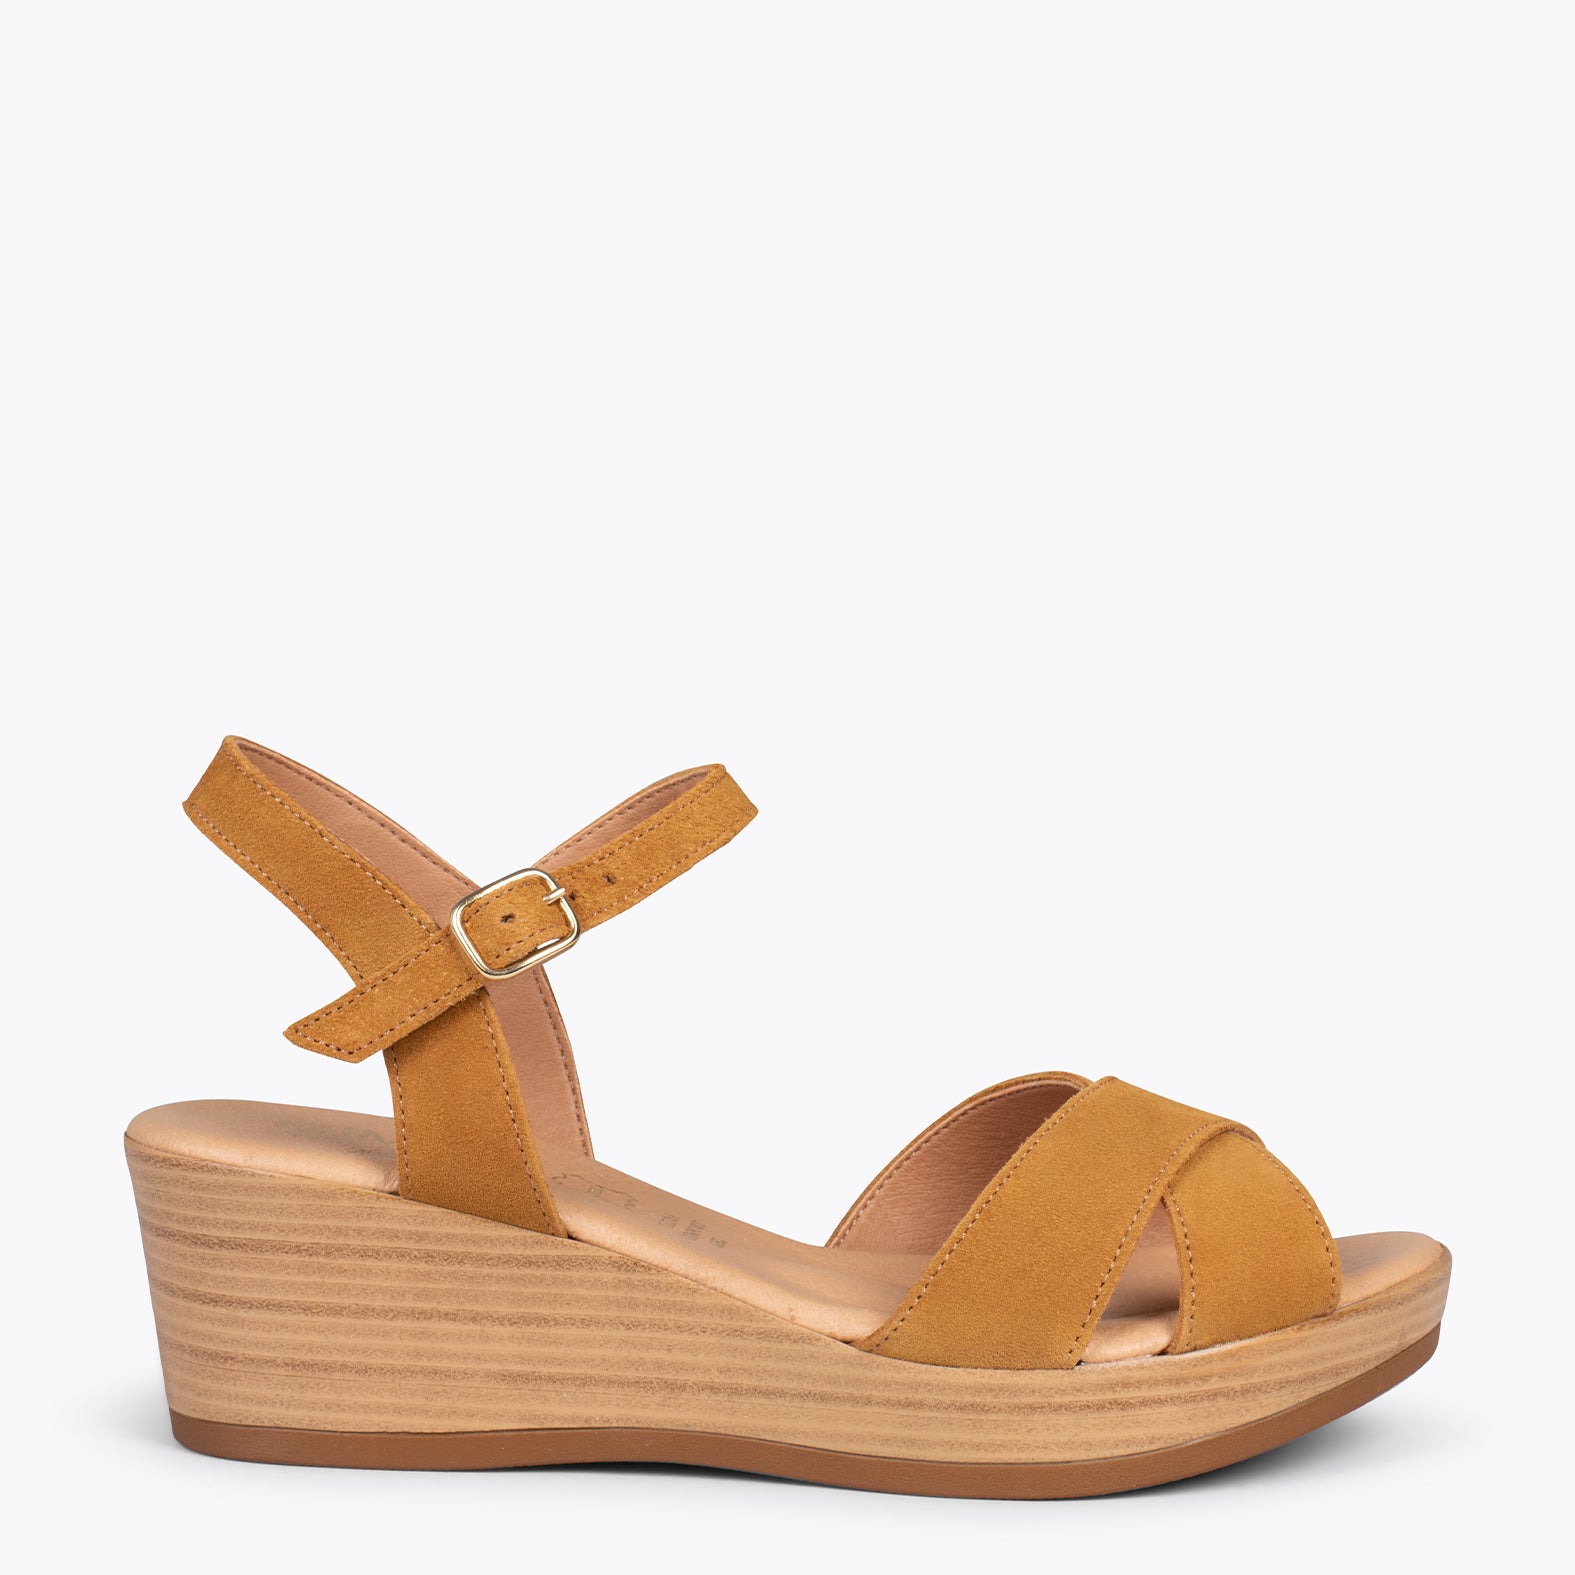 SEA- CAMEL comfortable sandal with wedge